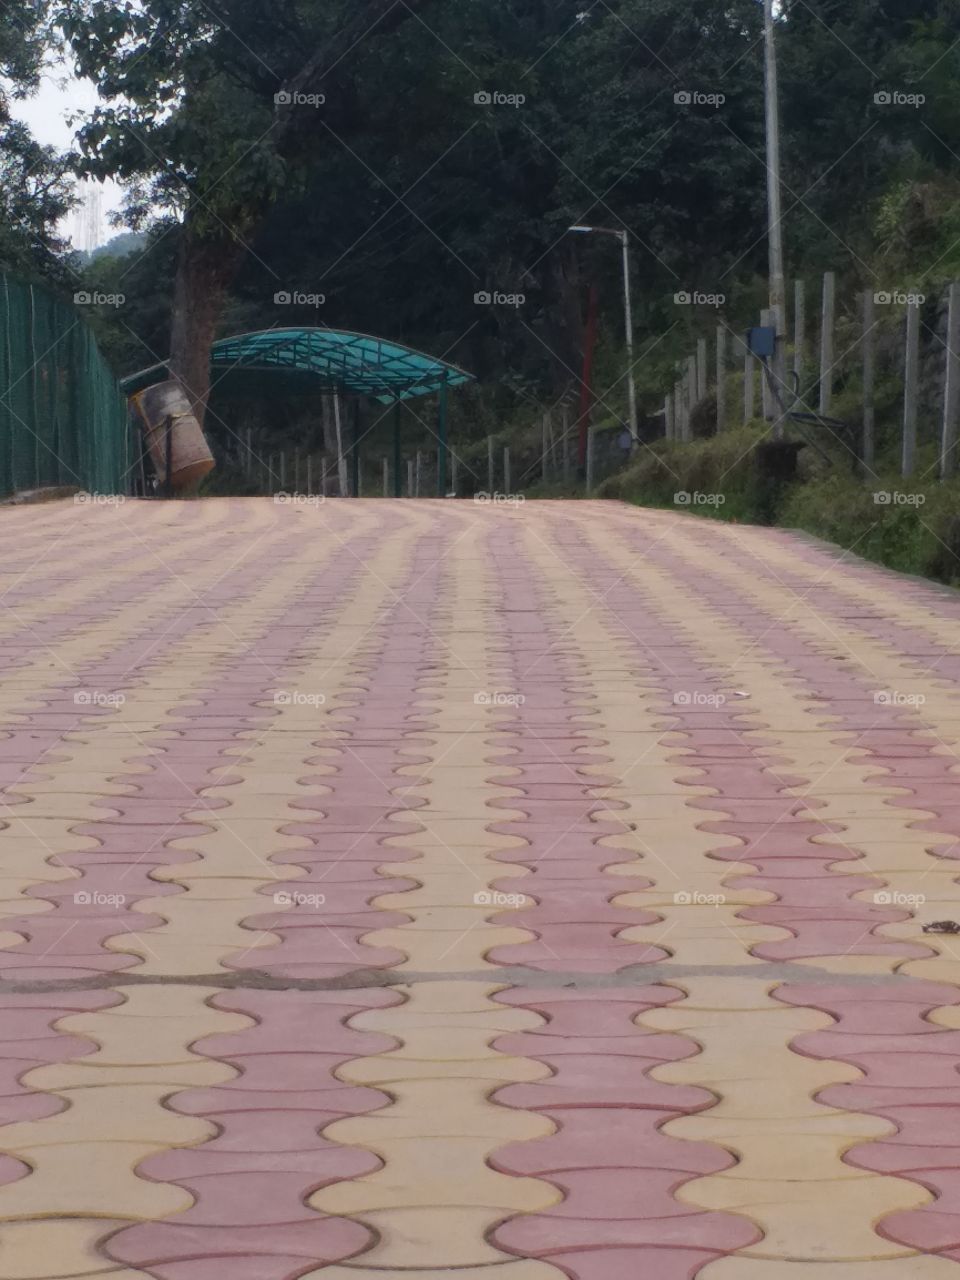 this is Footpath